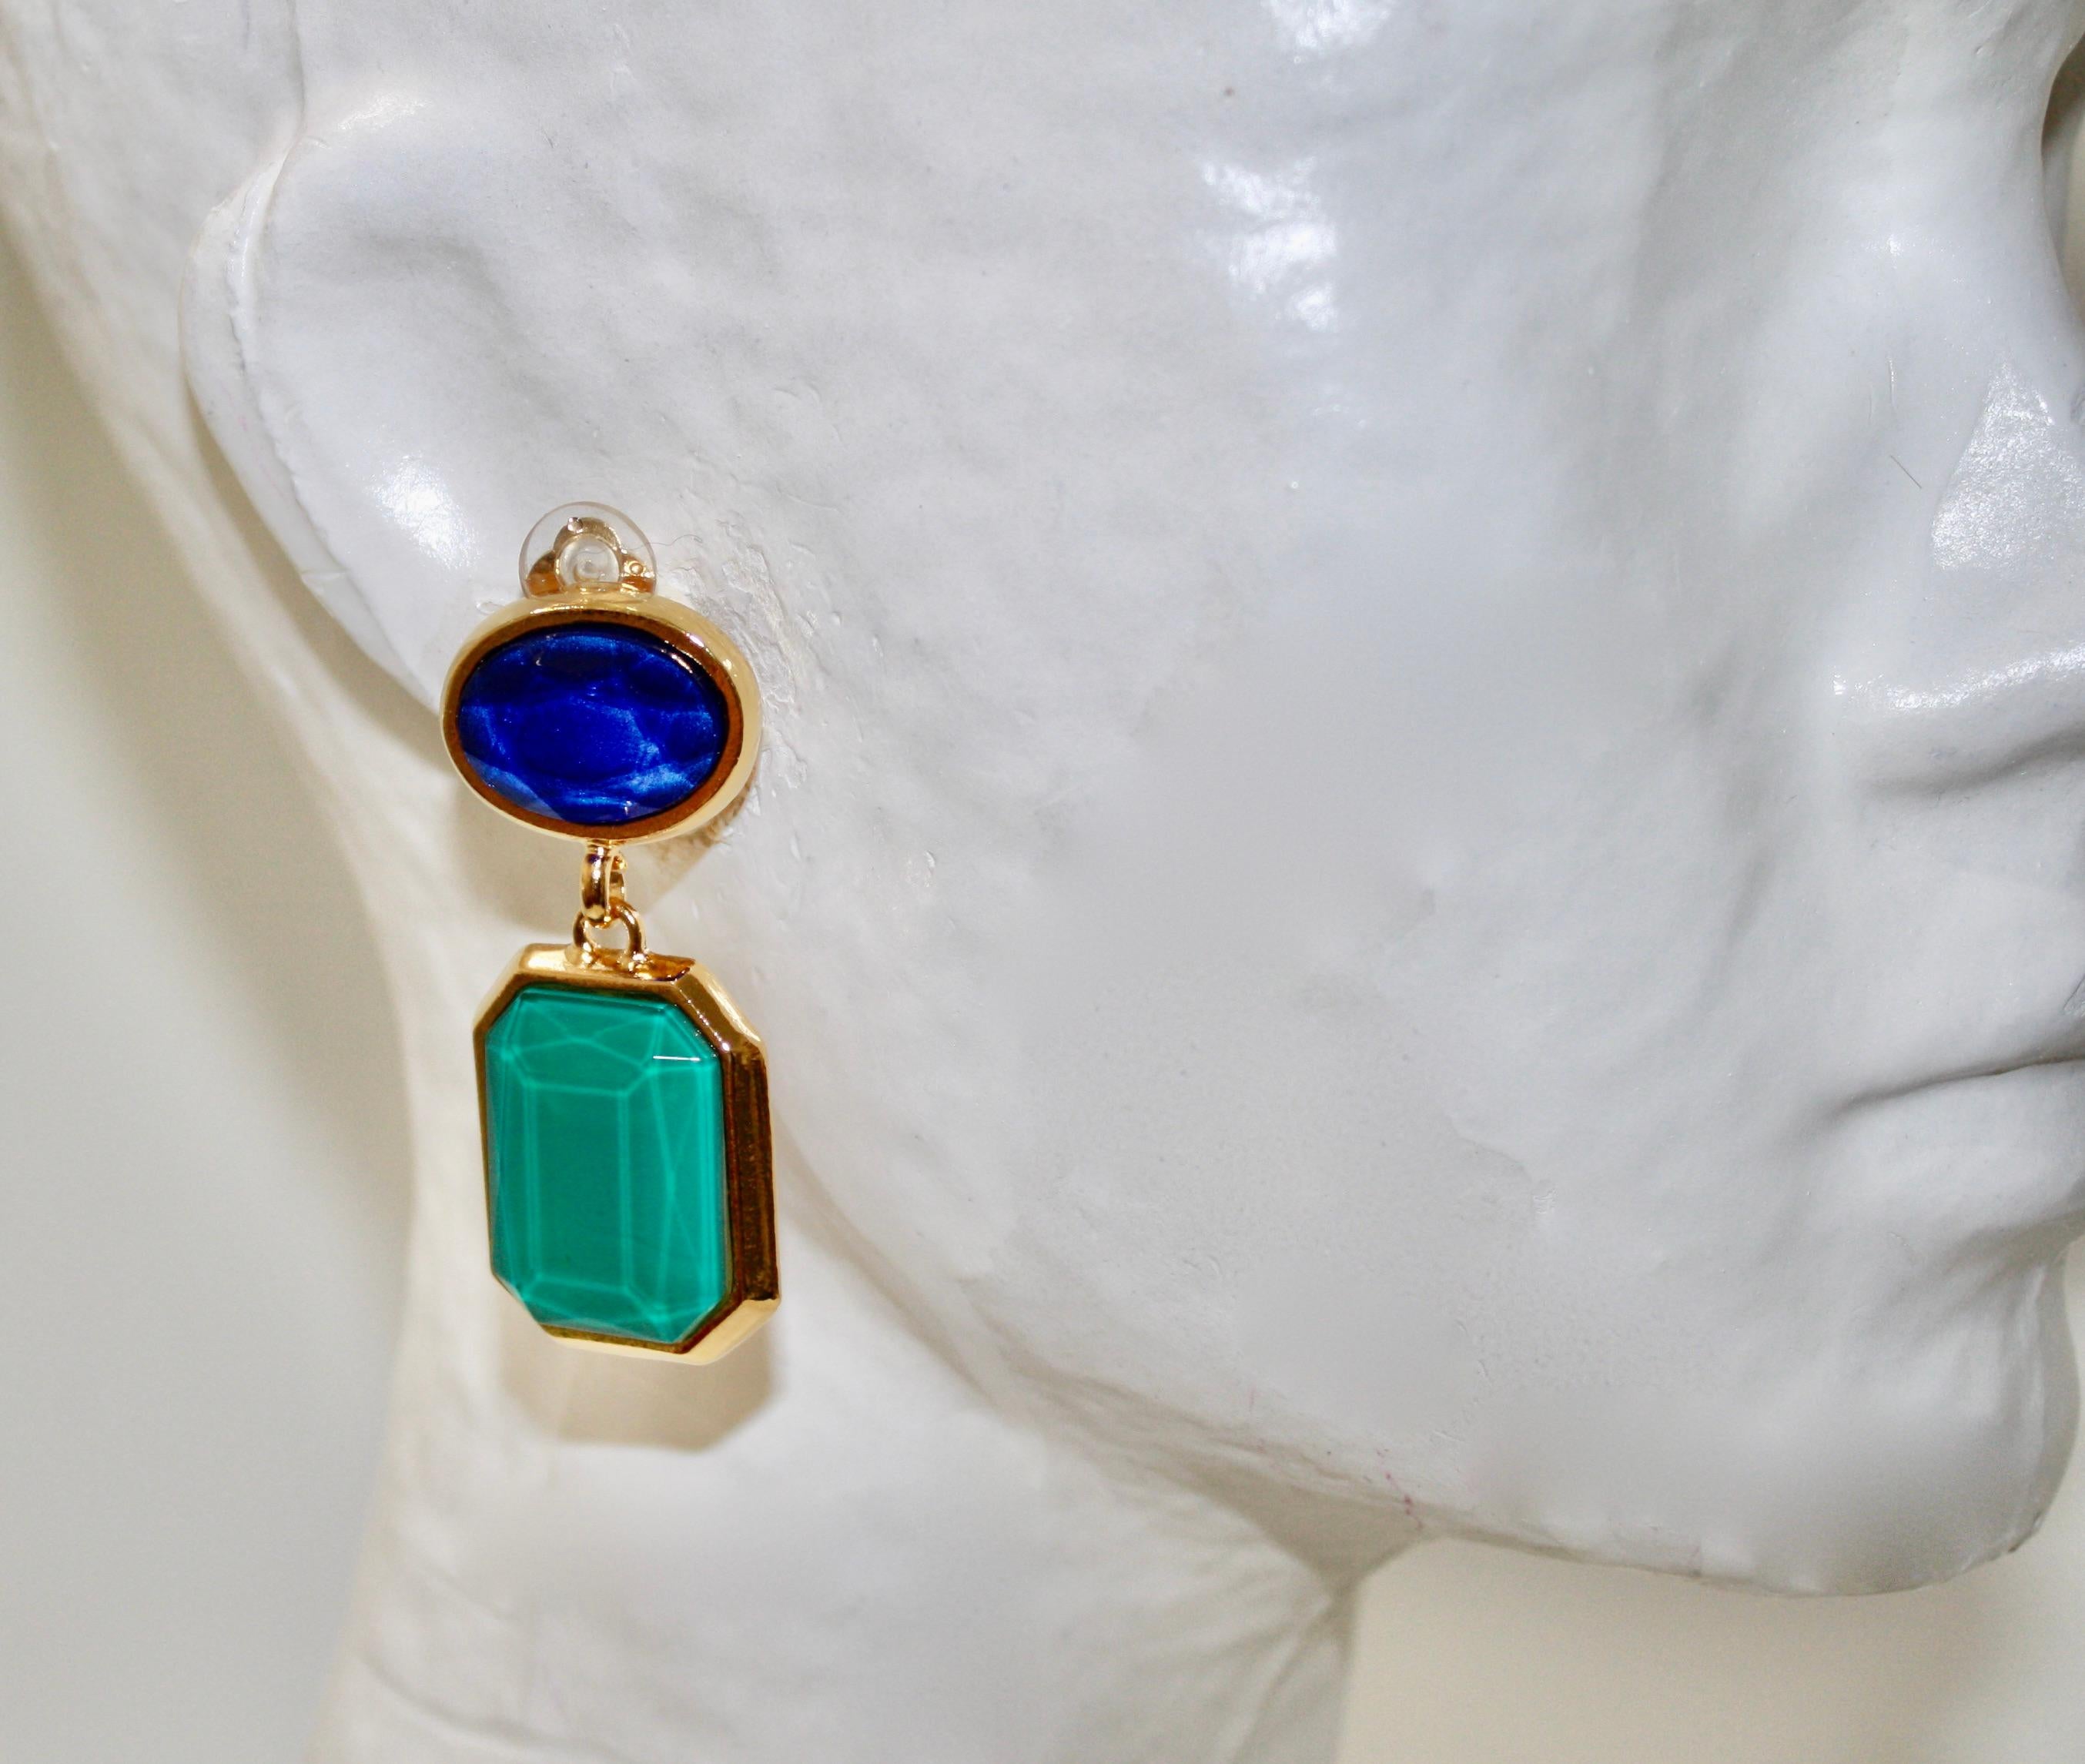 Clip earrings with blue and green resin. 24-carat gilded brass.
Signature on the back
Philippe Ferrandis, French luxury designer. His jewels are hand-made in his workshops in Paris, in the respect of an exceptional know-how.

He has been a parurier